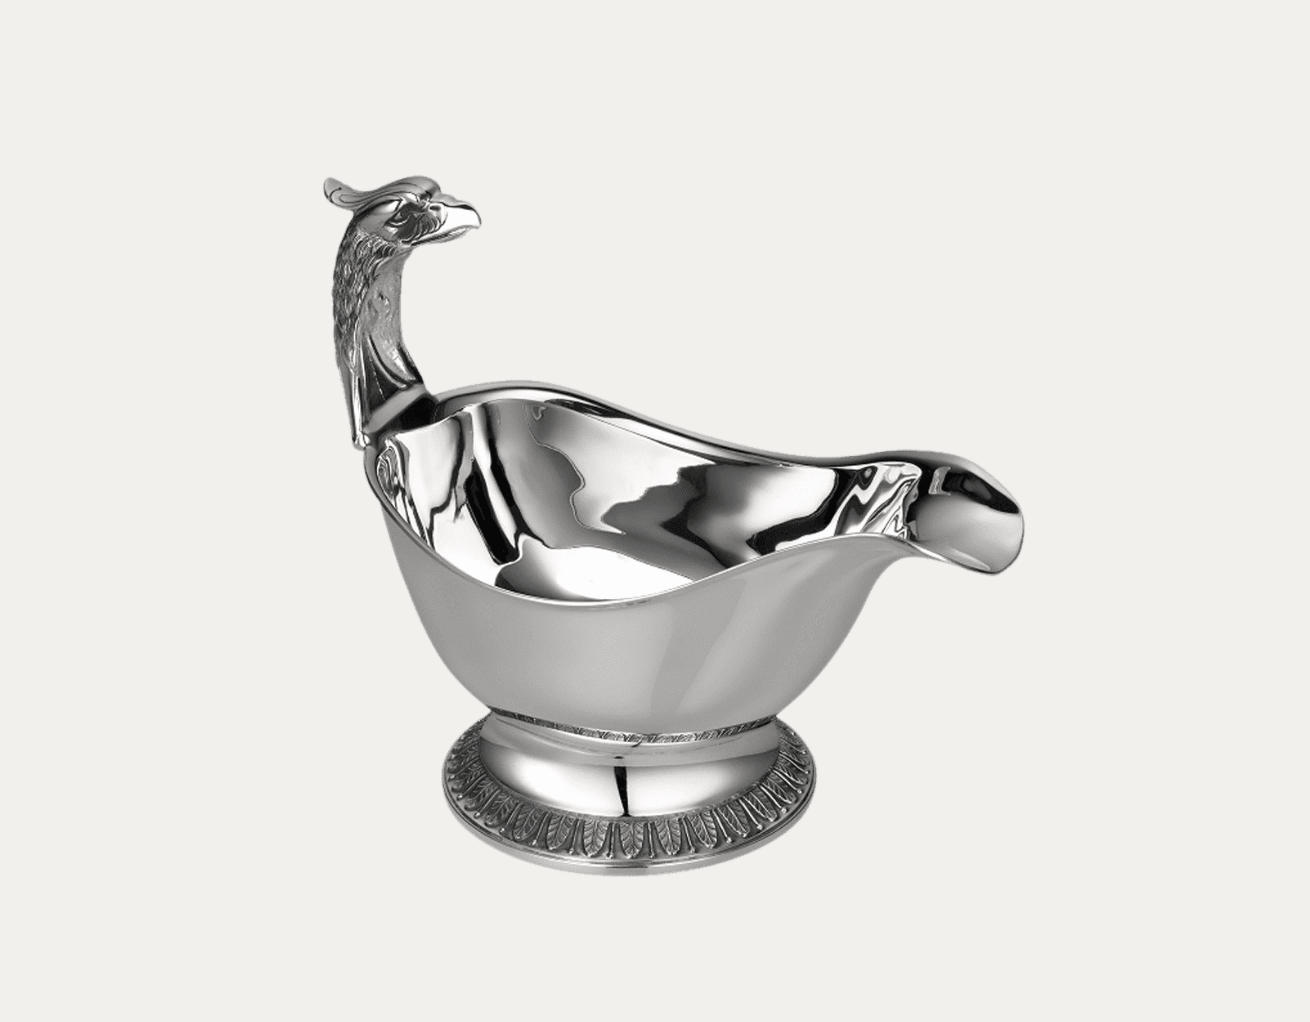 Choice 3 oz. Stainless Steel Gravy Boat